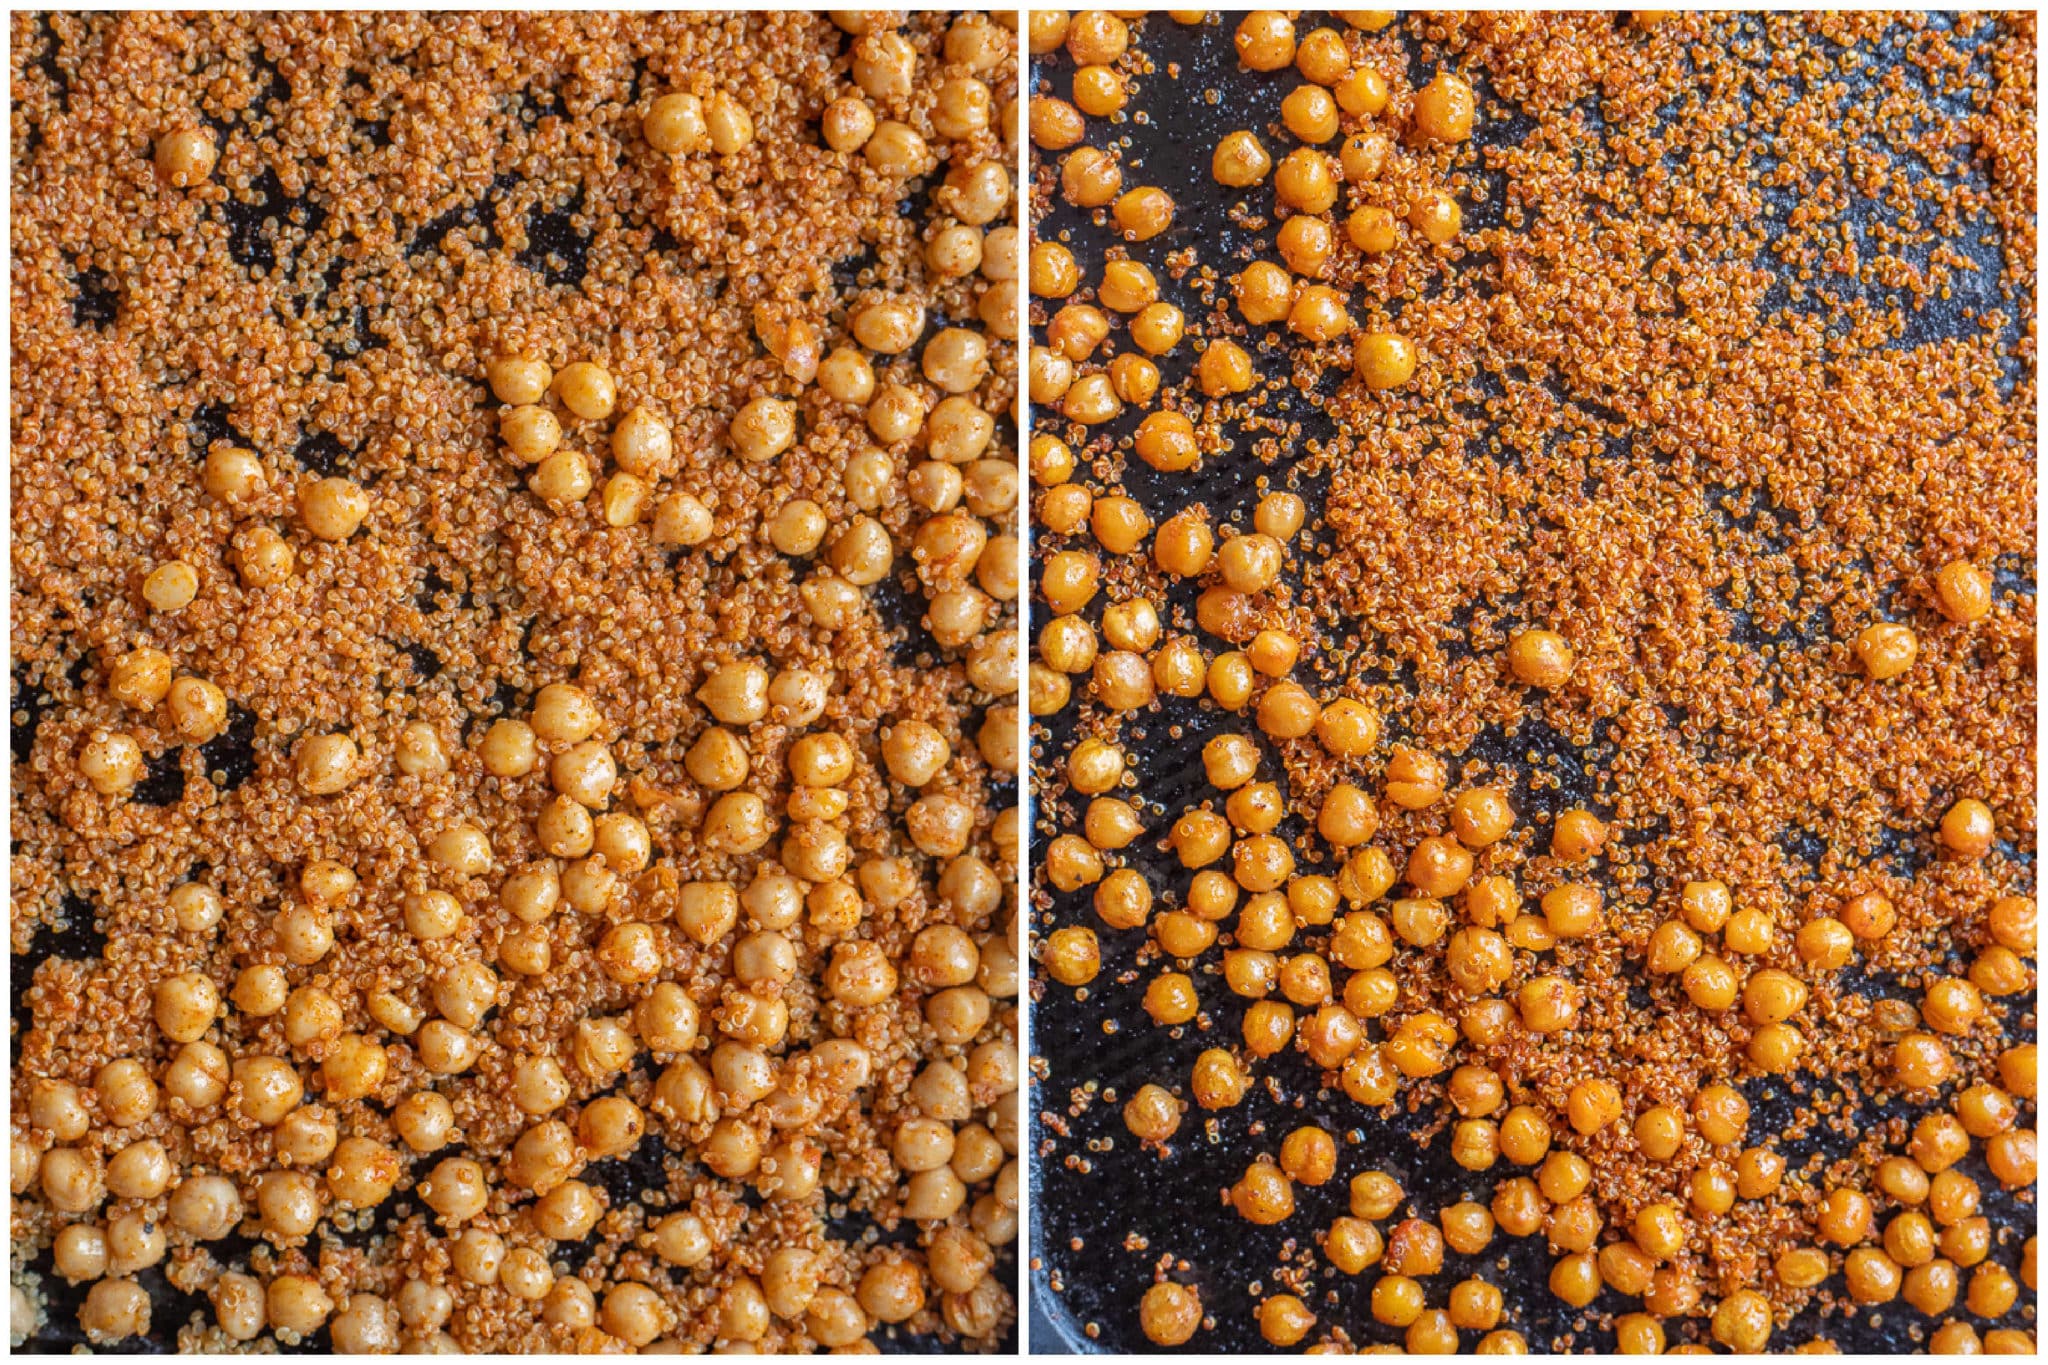 roasted quinoa and chickpeas before and after being in the oven